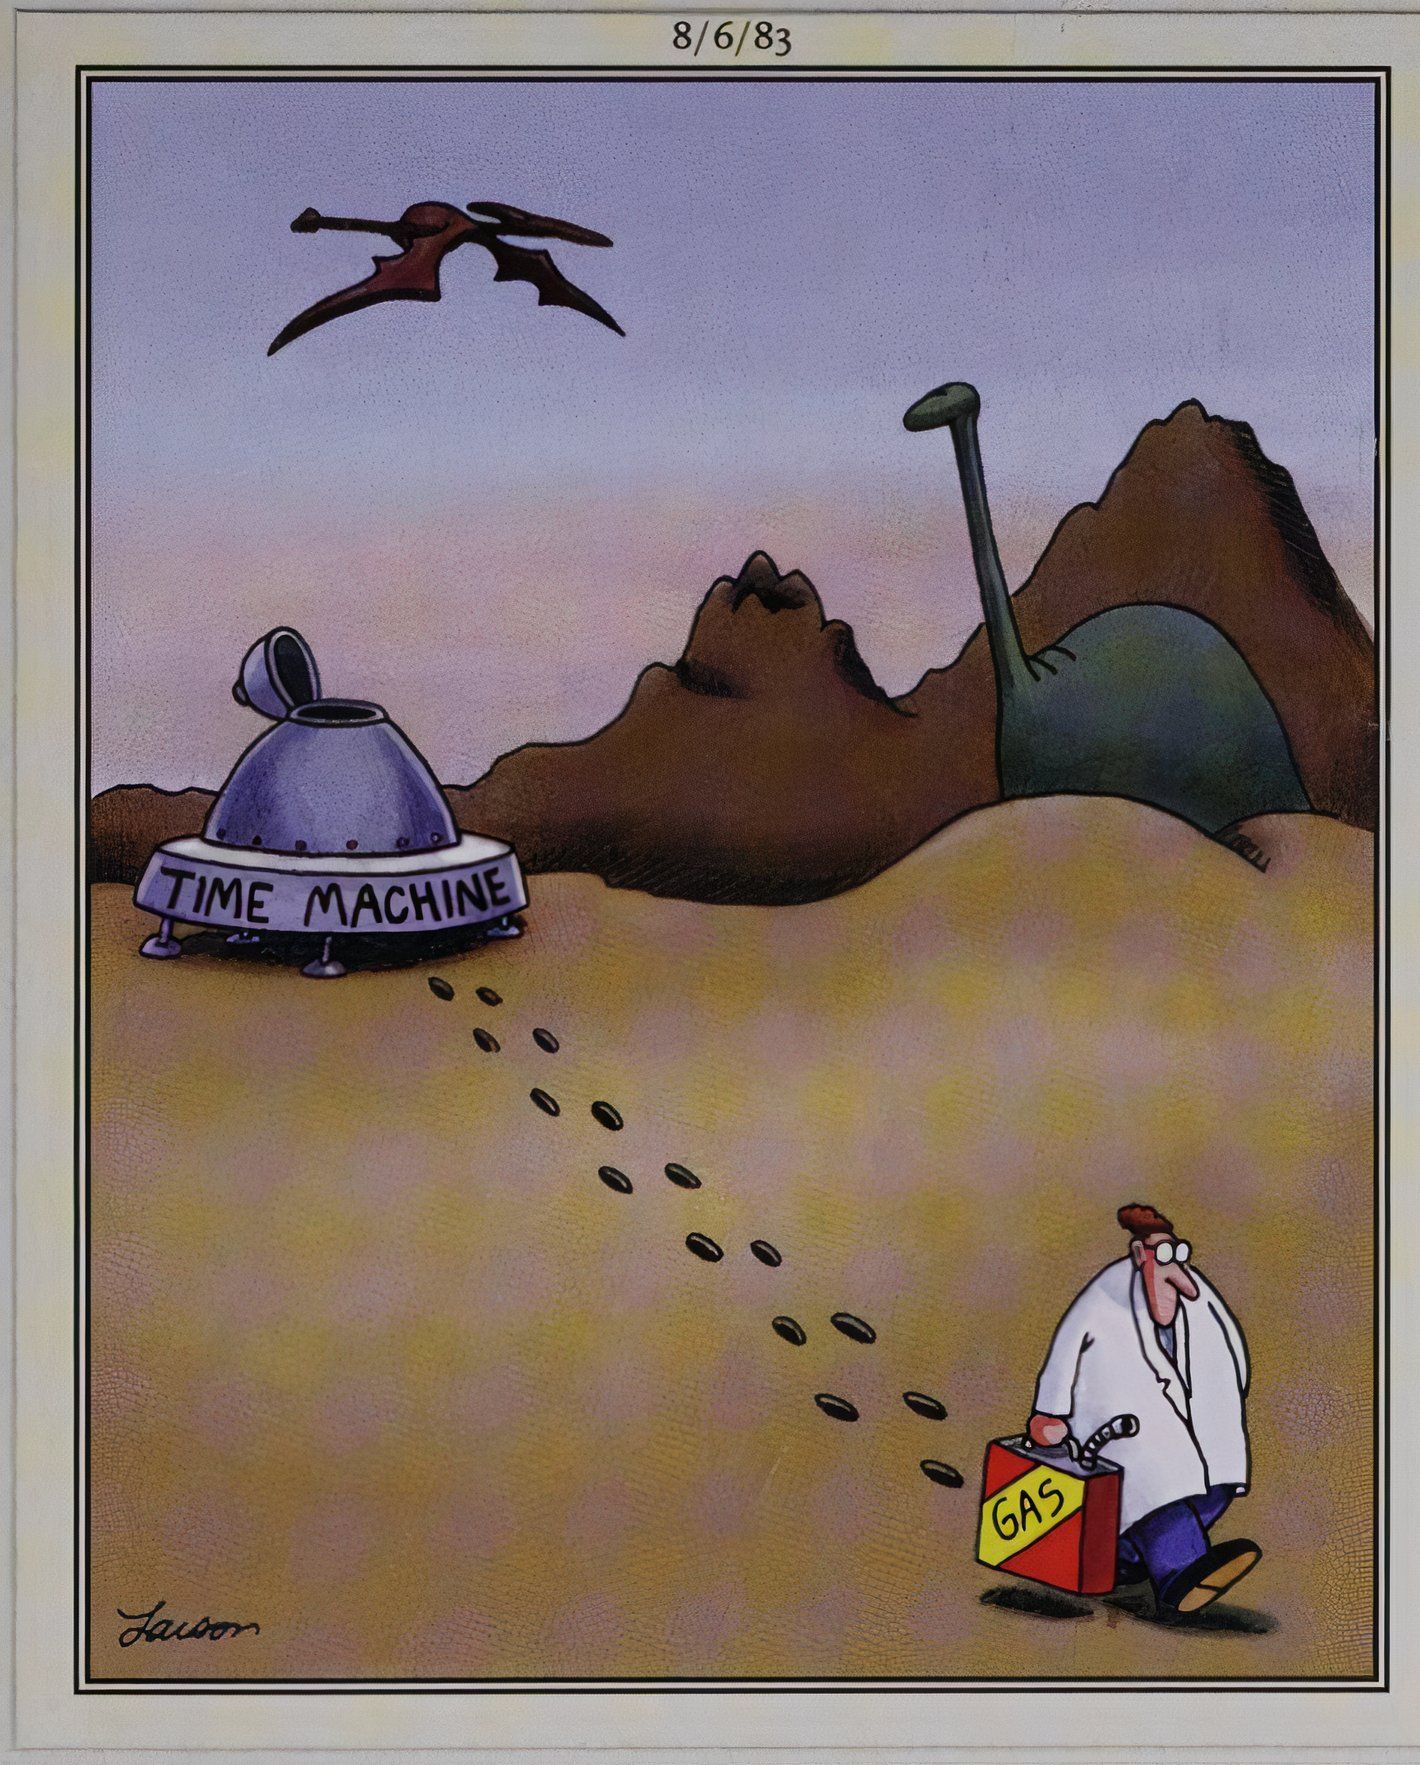 Far Side, time machine runs out of gas in middle of pre historic desert